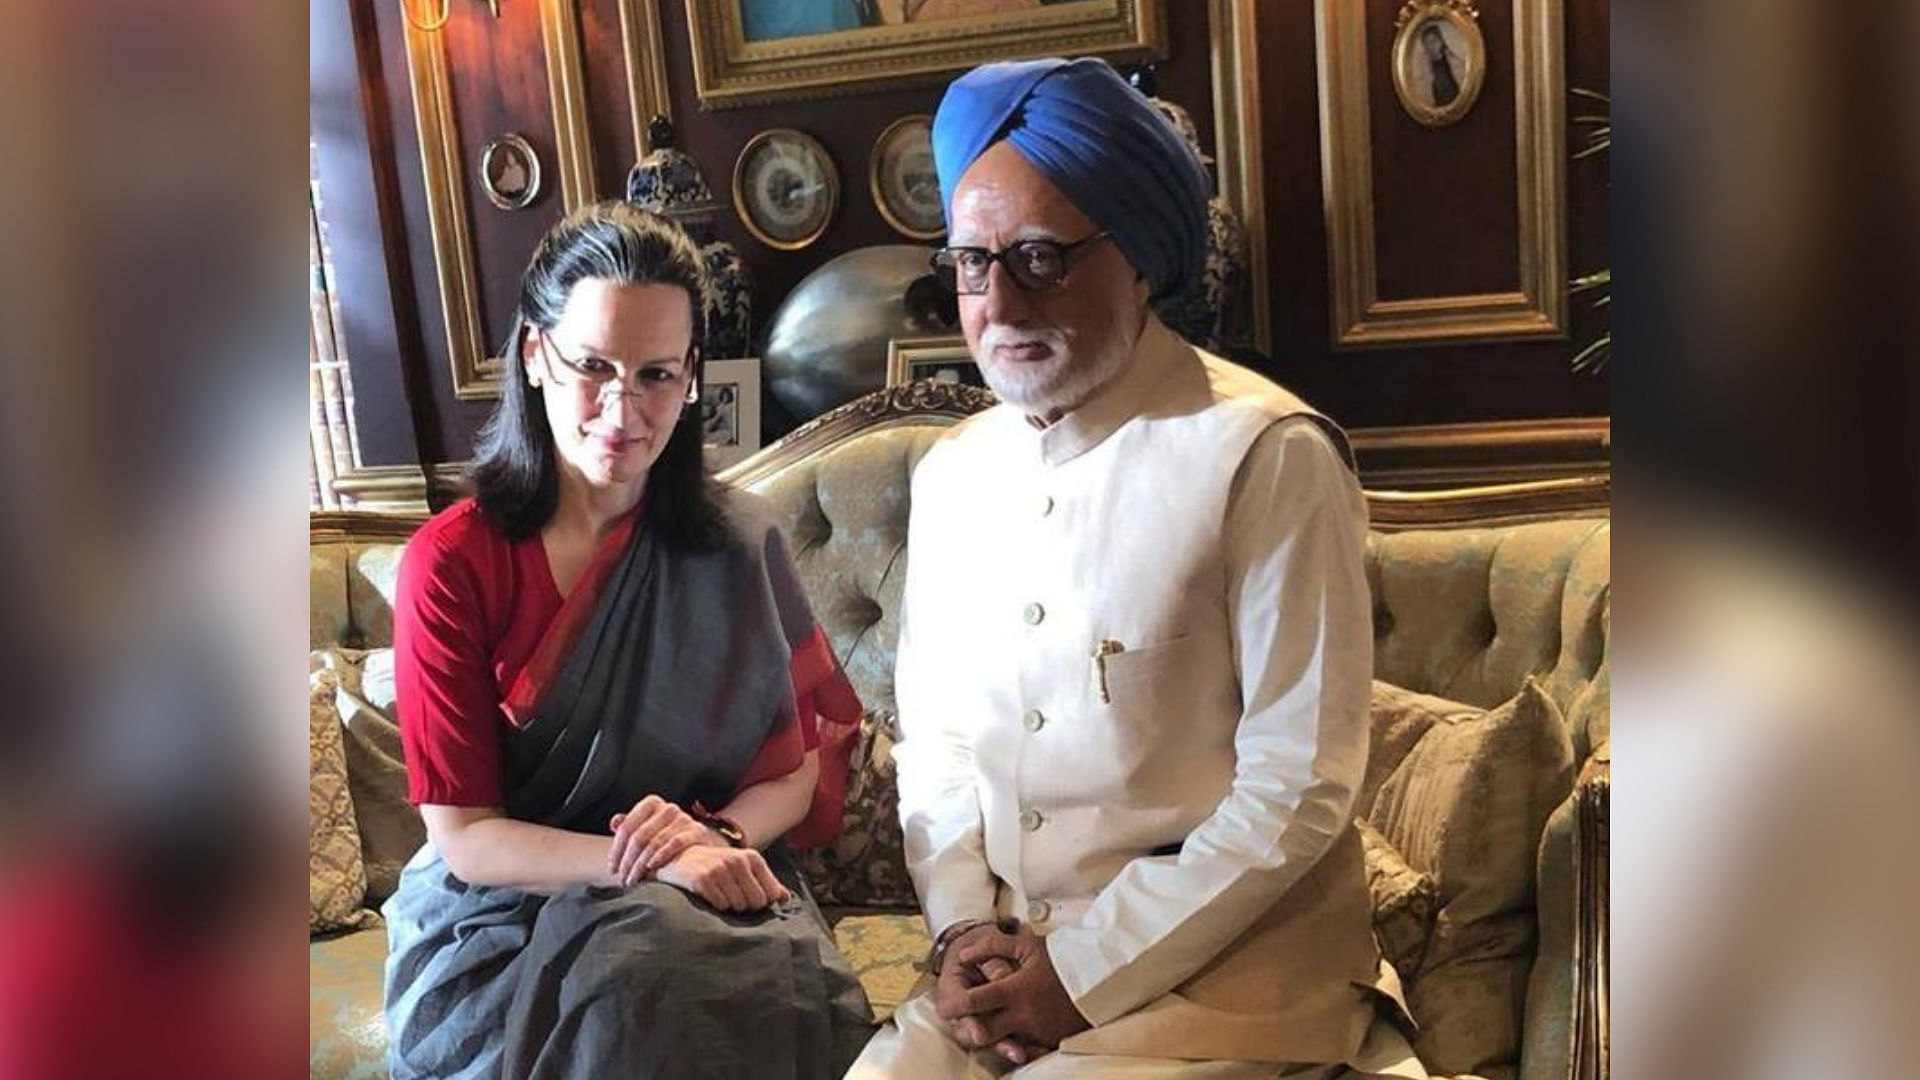 Suzanne Bernert and Anupam Kher as Sonia Gandhi and Manmohan Singh in <i>The Accidental Prime Minister</i>.